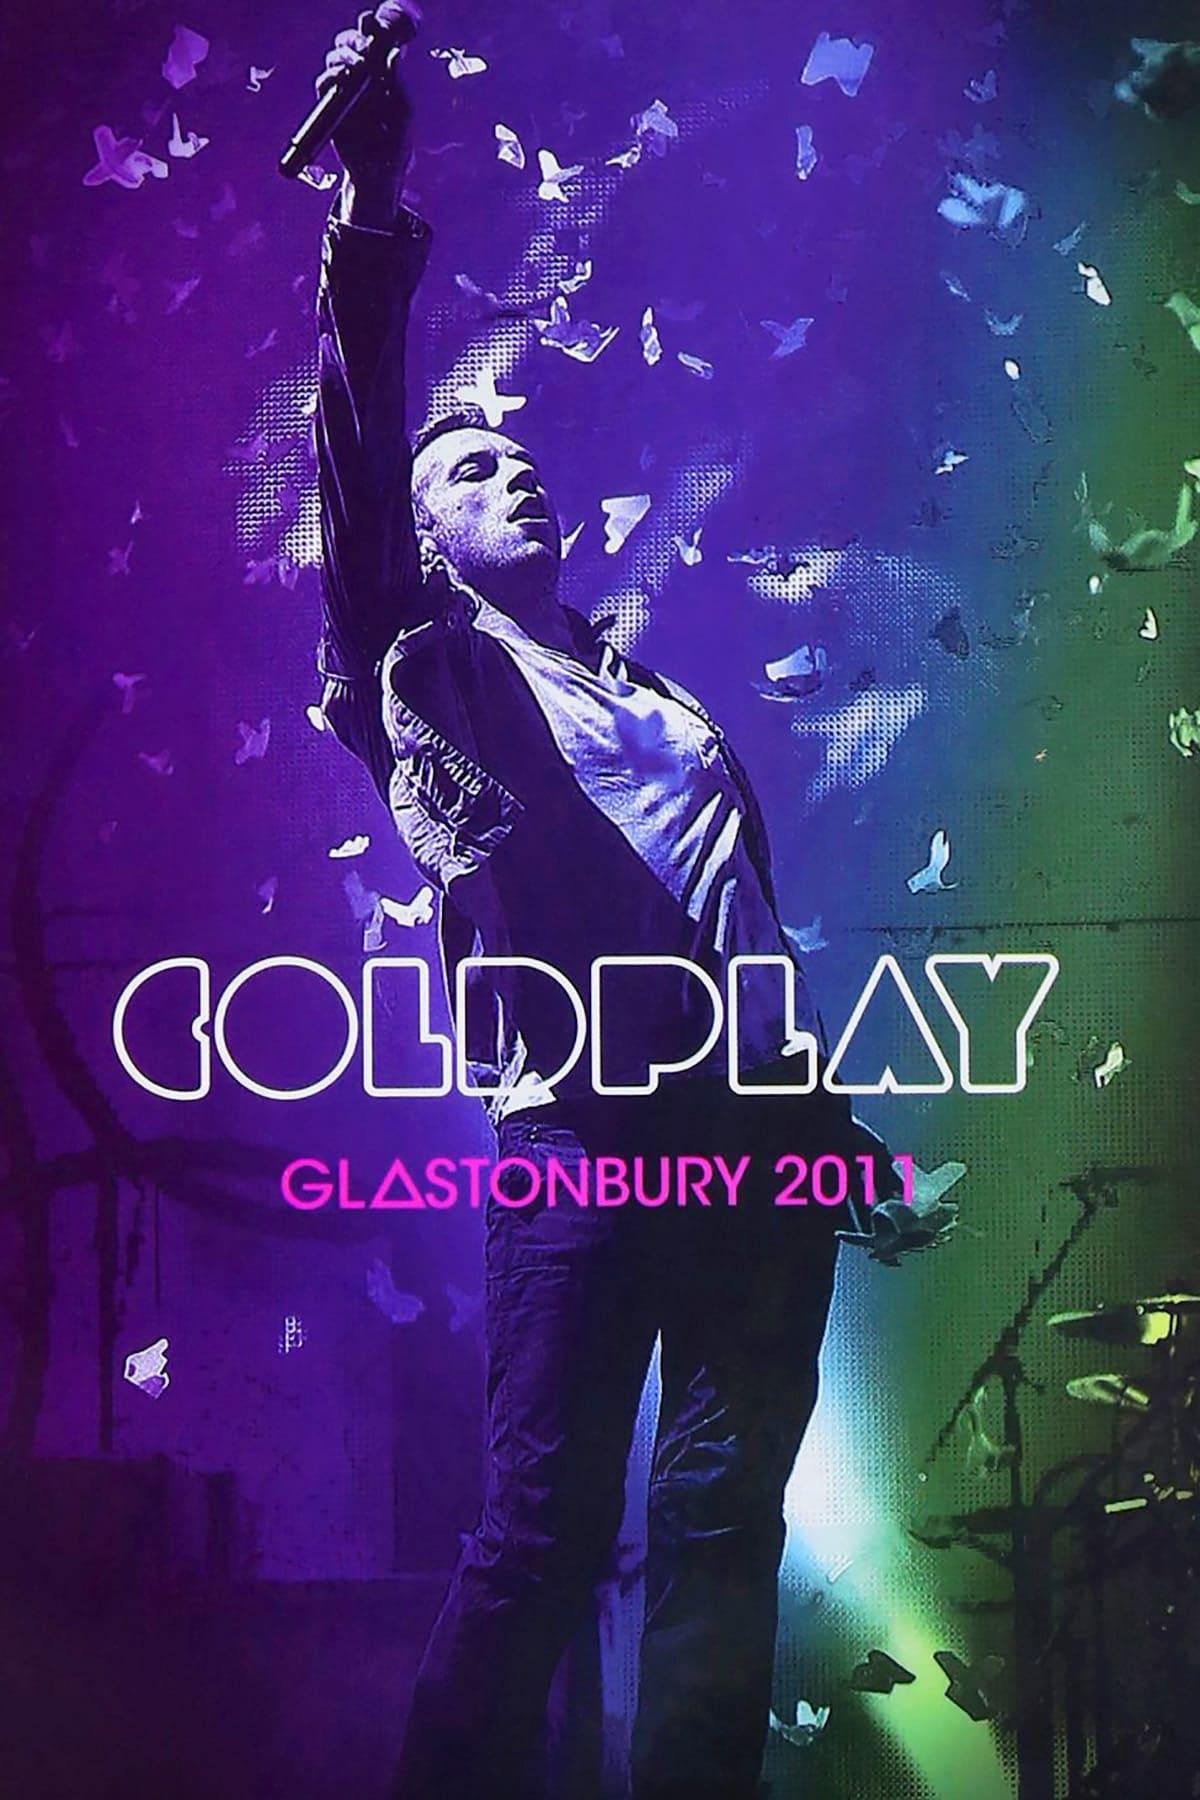 Coldplay: Live at Glastonbury 2011 poster